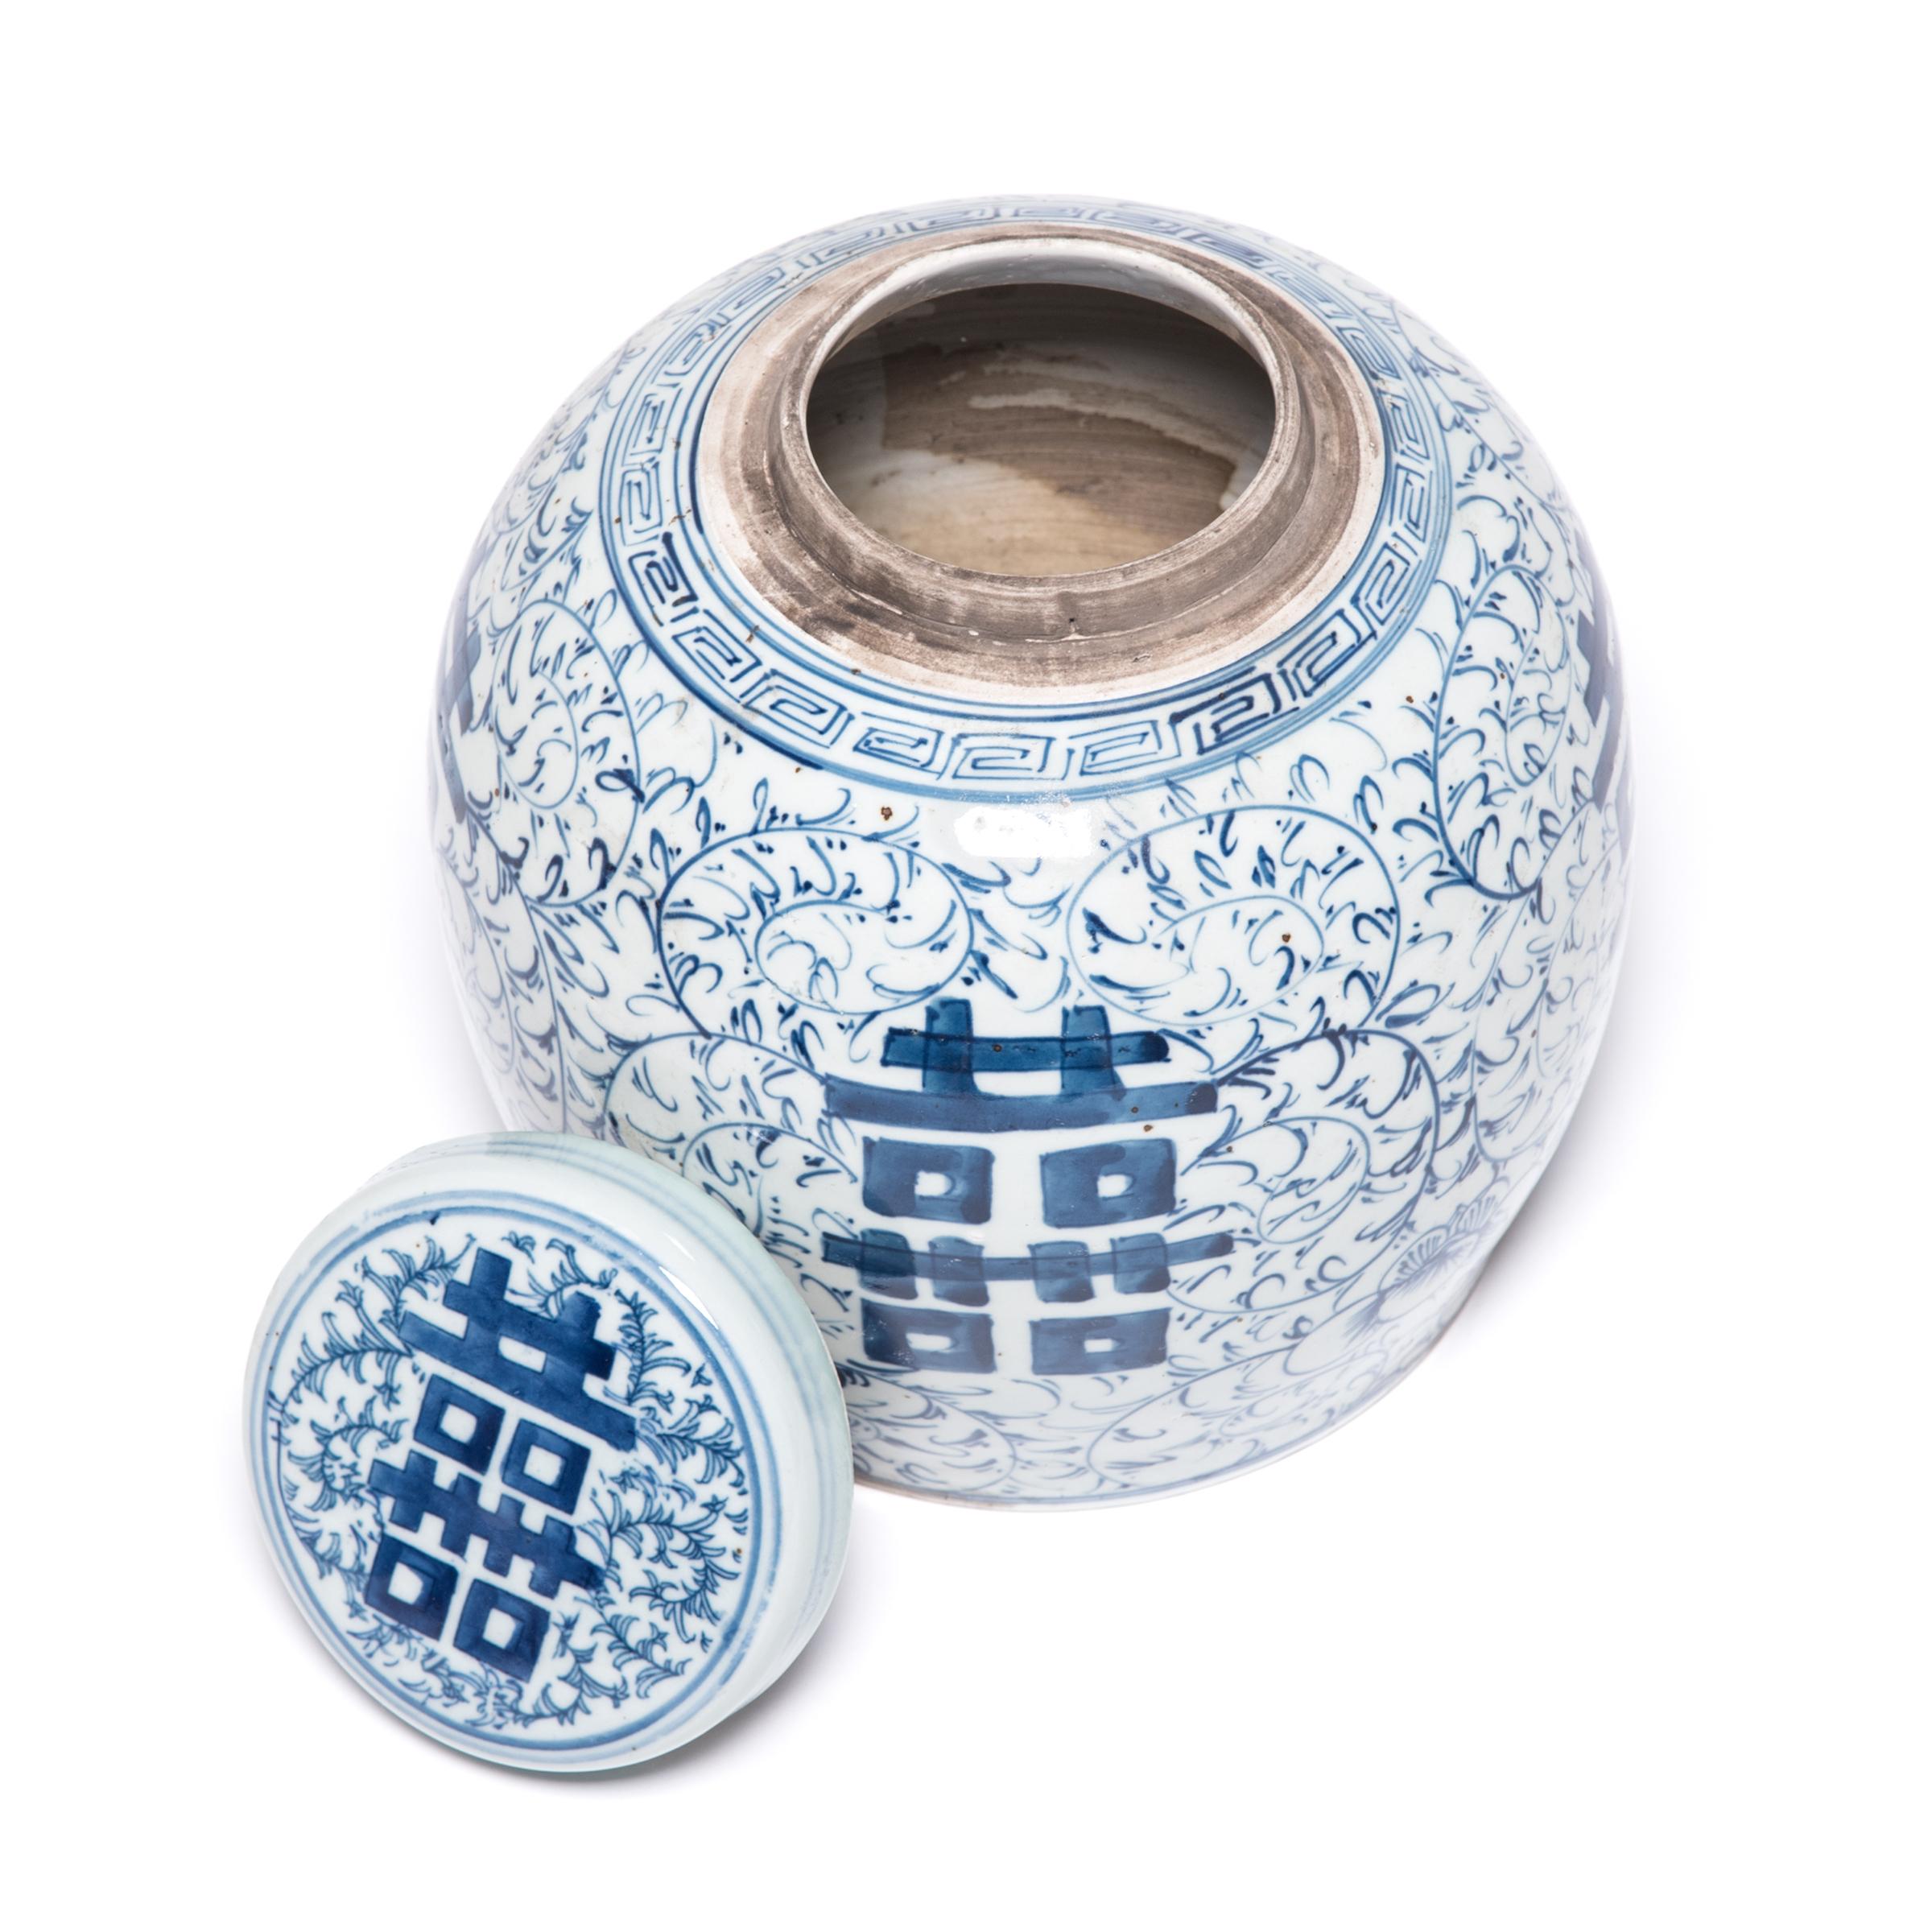 20th Century Chinese Blue and White Double Happiness Ginger Jar, circa 1900